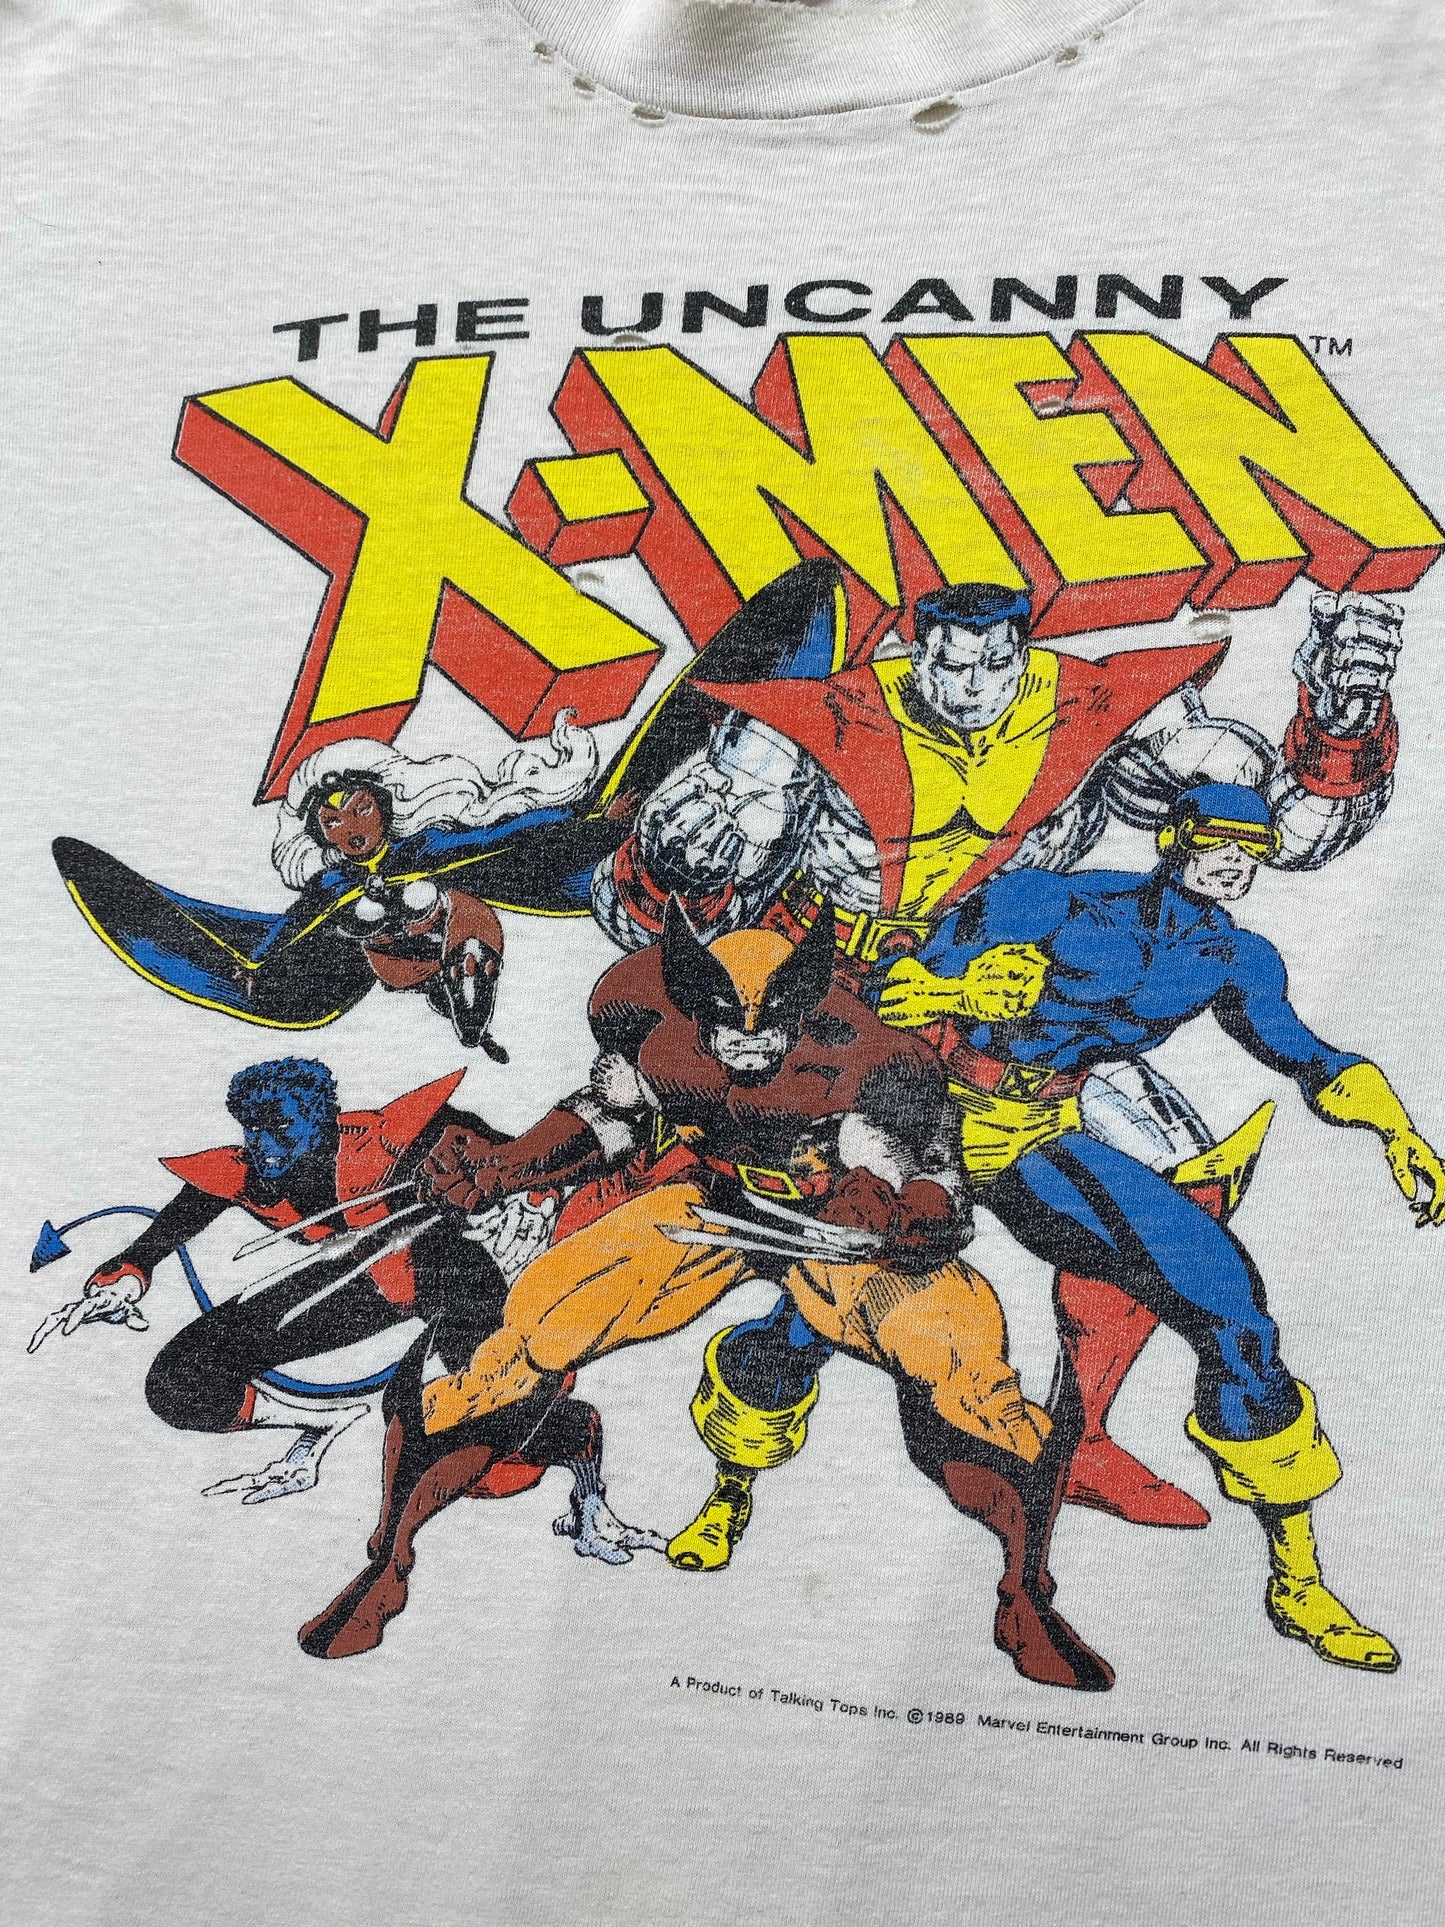 INQUIRE “THE UNCANNY X-MEN” t-shirt from 1989 Large